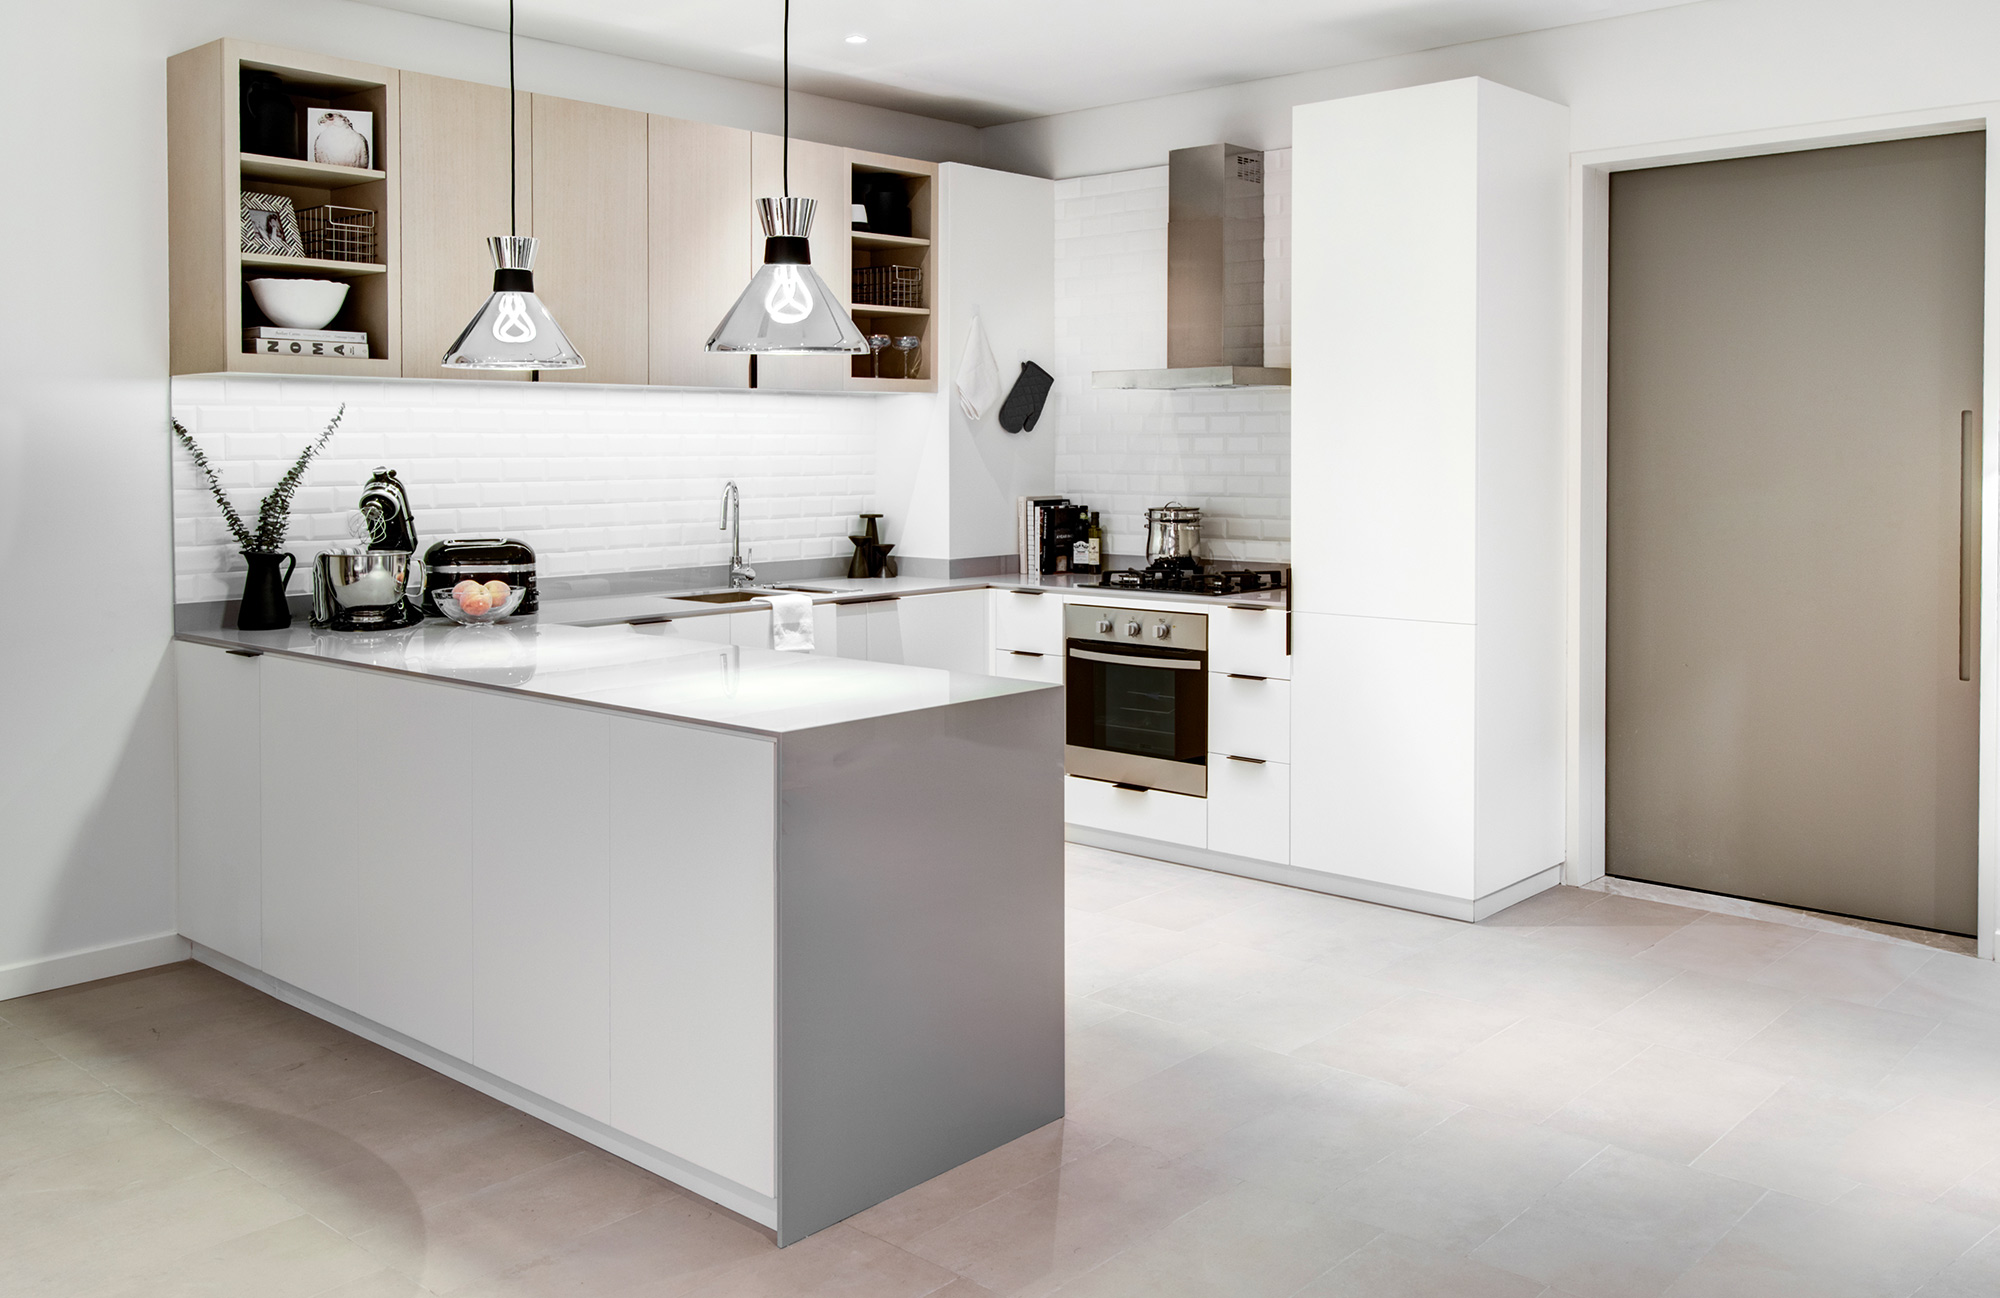 Image of Belgravia Heights I Show Apartment Kitchen in A modern cuisine that looks to tradition - Cosentino